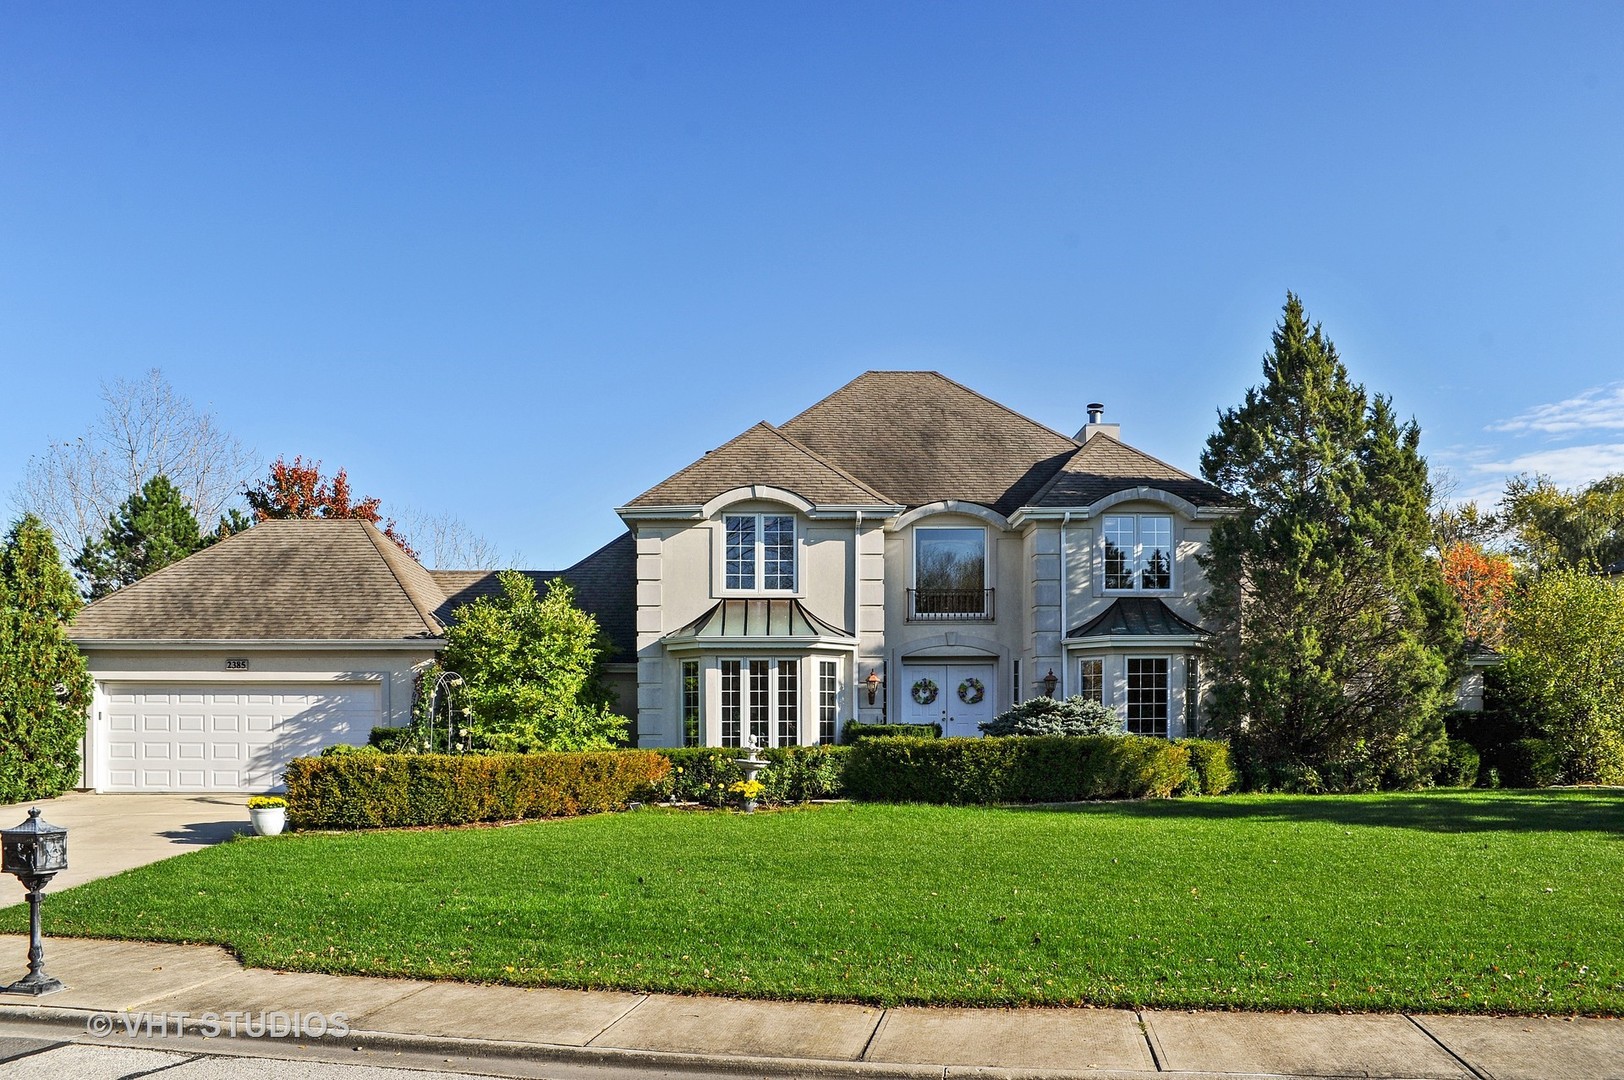 houses in highland park il